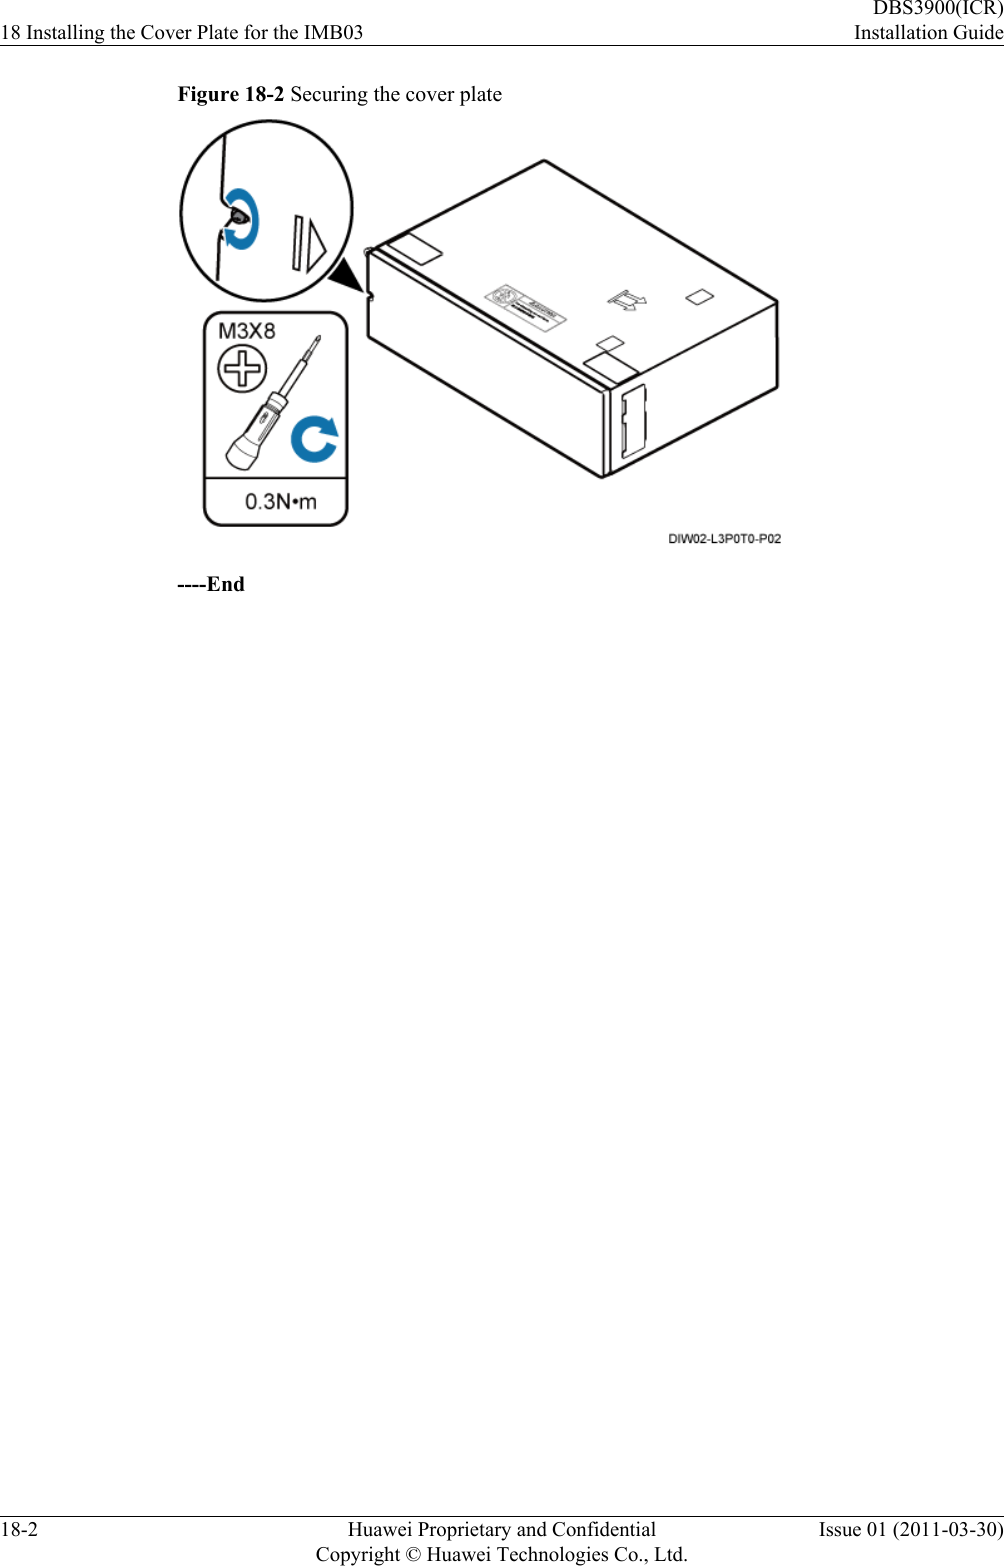 Figure 18-2 Securing the cover plate----End18 Installing the Cover Plate for the IMB03DBS3900(ICR)Installation Guide18-2 Huawei Proprietary and ConfidentialCopyright © Huawei Technologies Co., Ltd.Issue 01 (2011-03-30)